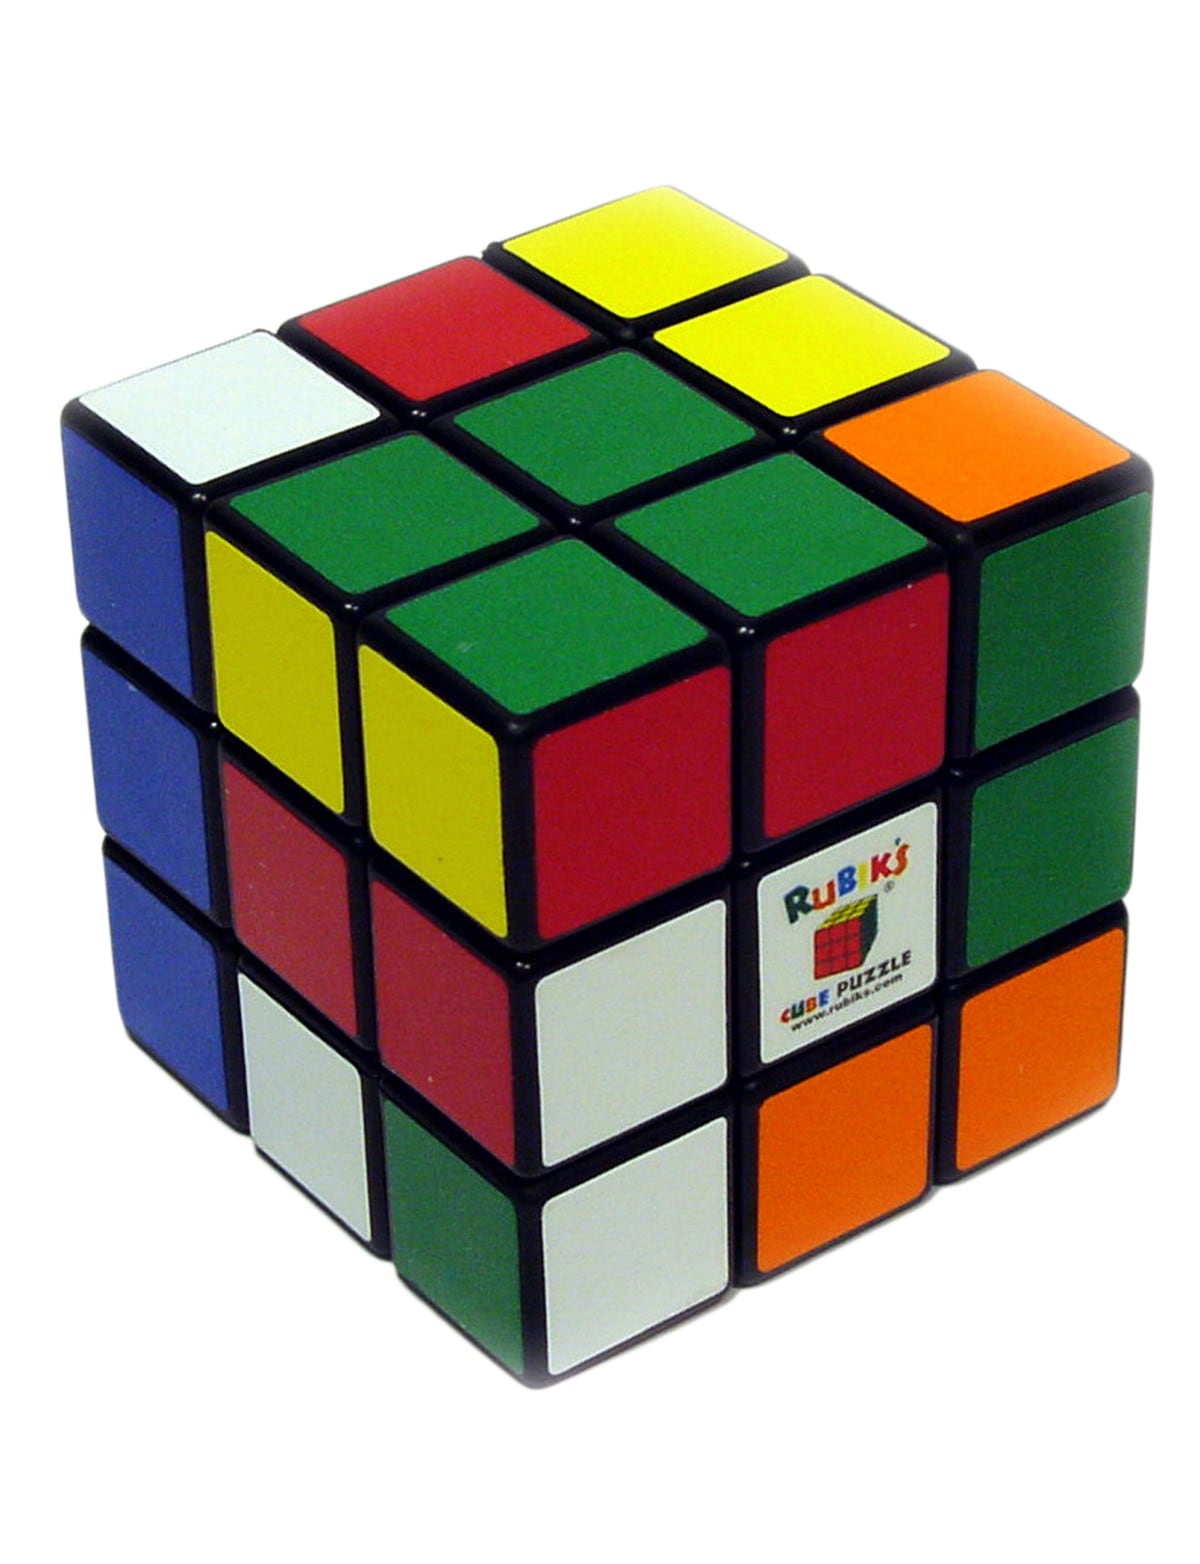 Rubiks 3x3 Cube - Games, Cards & Puzzles